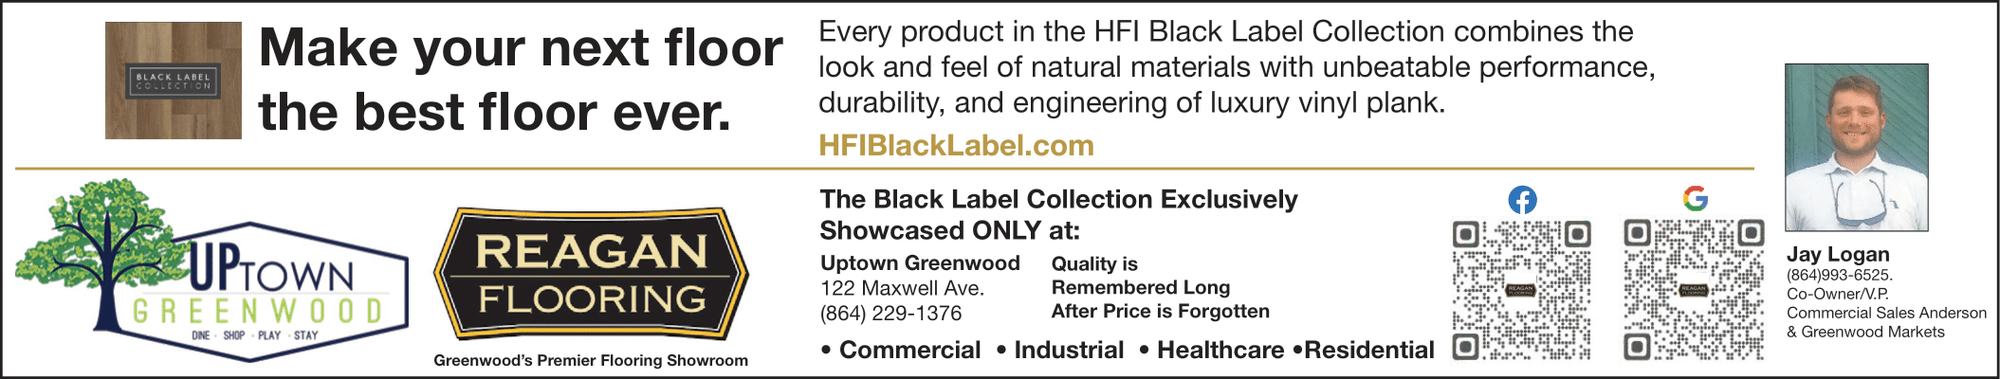 Make your next floor the best floor with Reagan Flooring in Greenwood, SC with the HFI Black Label Collection